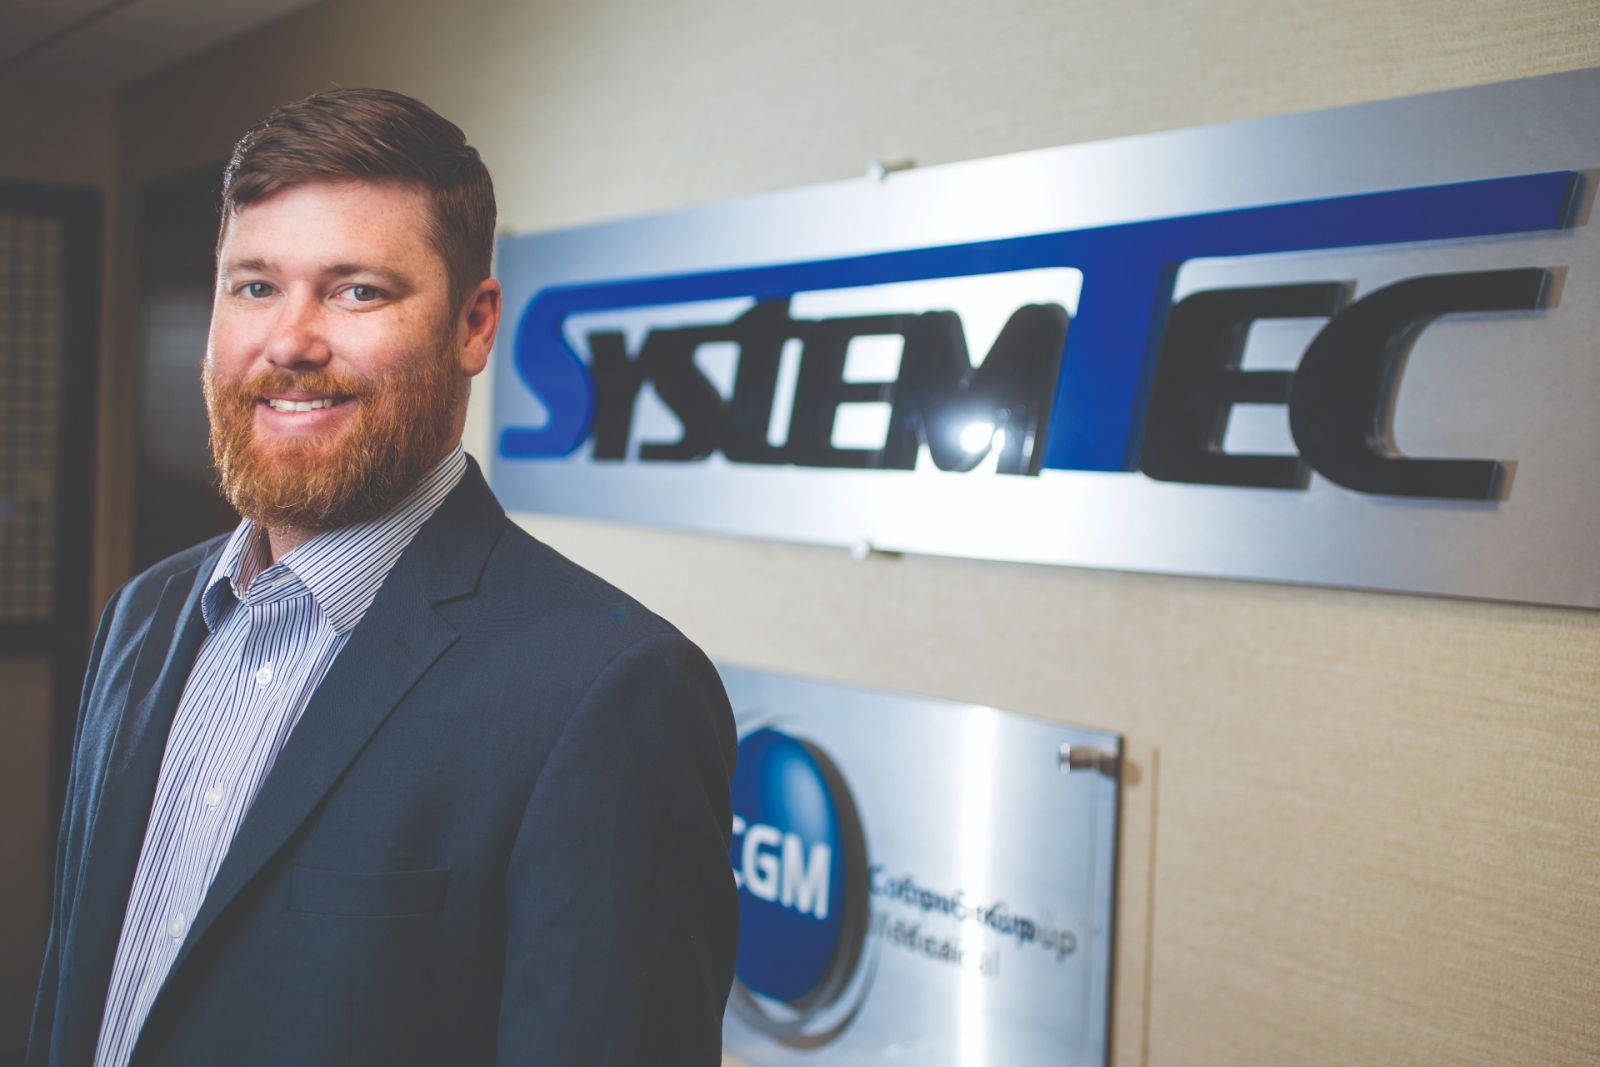 SYSTEMTEC is branching out to offer clients finance and accounting services, hiring Tom Kokoska to oversee the move. (Photo/Provided)